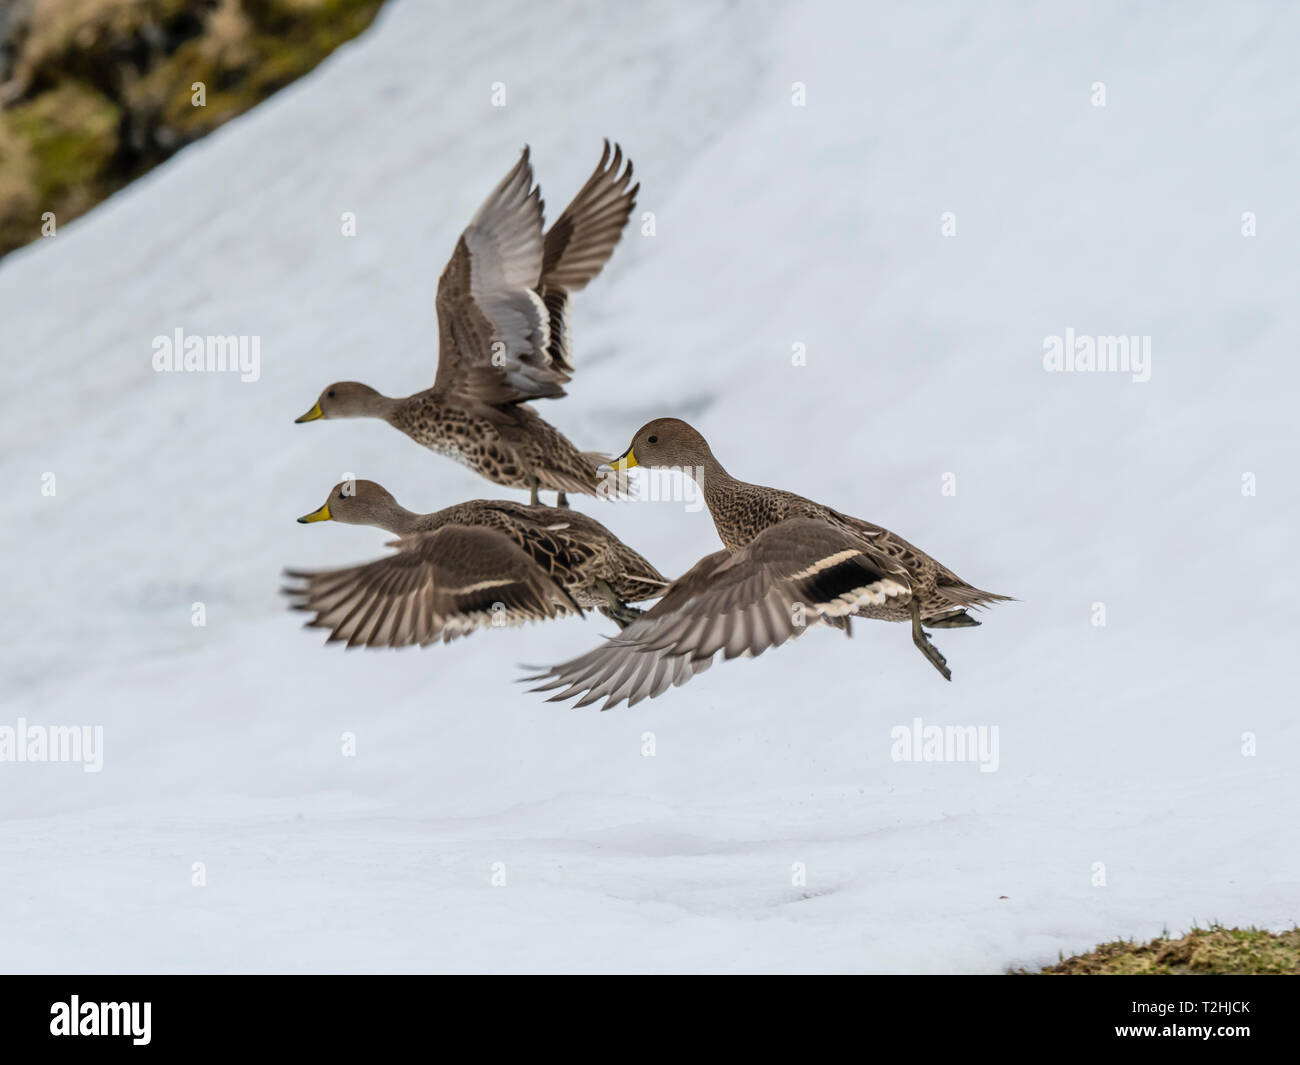 An endemic adult South Georgia pintails, Anas georgica, in flight at Moltke Harbour, Royal Bay, South Georgia Island, Atlantic Ocean Stock Photo